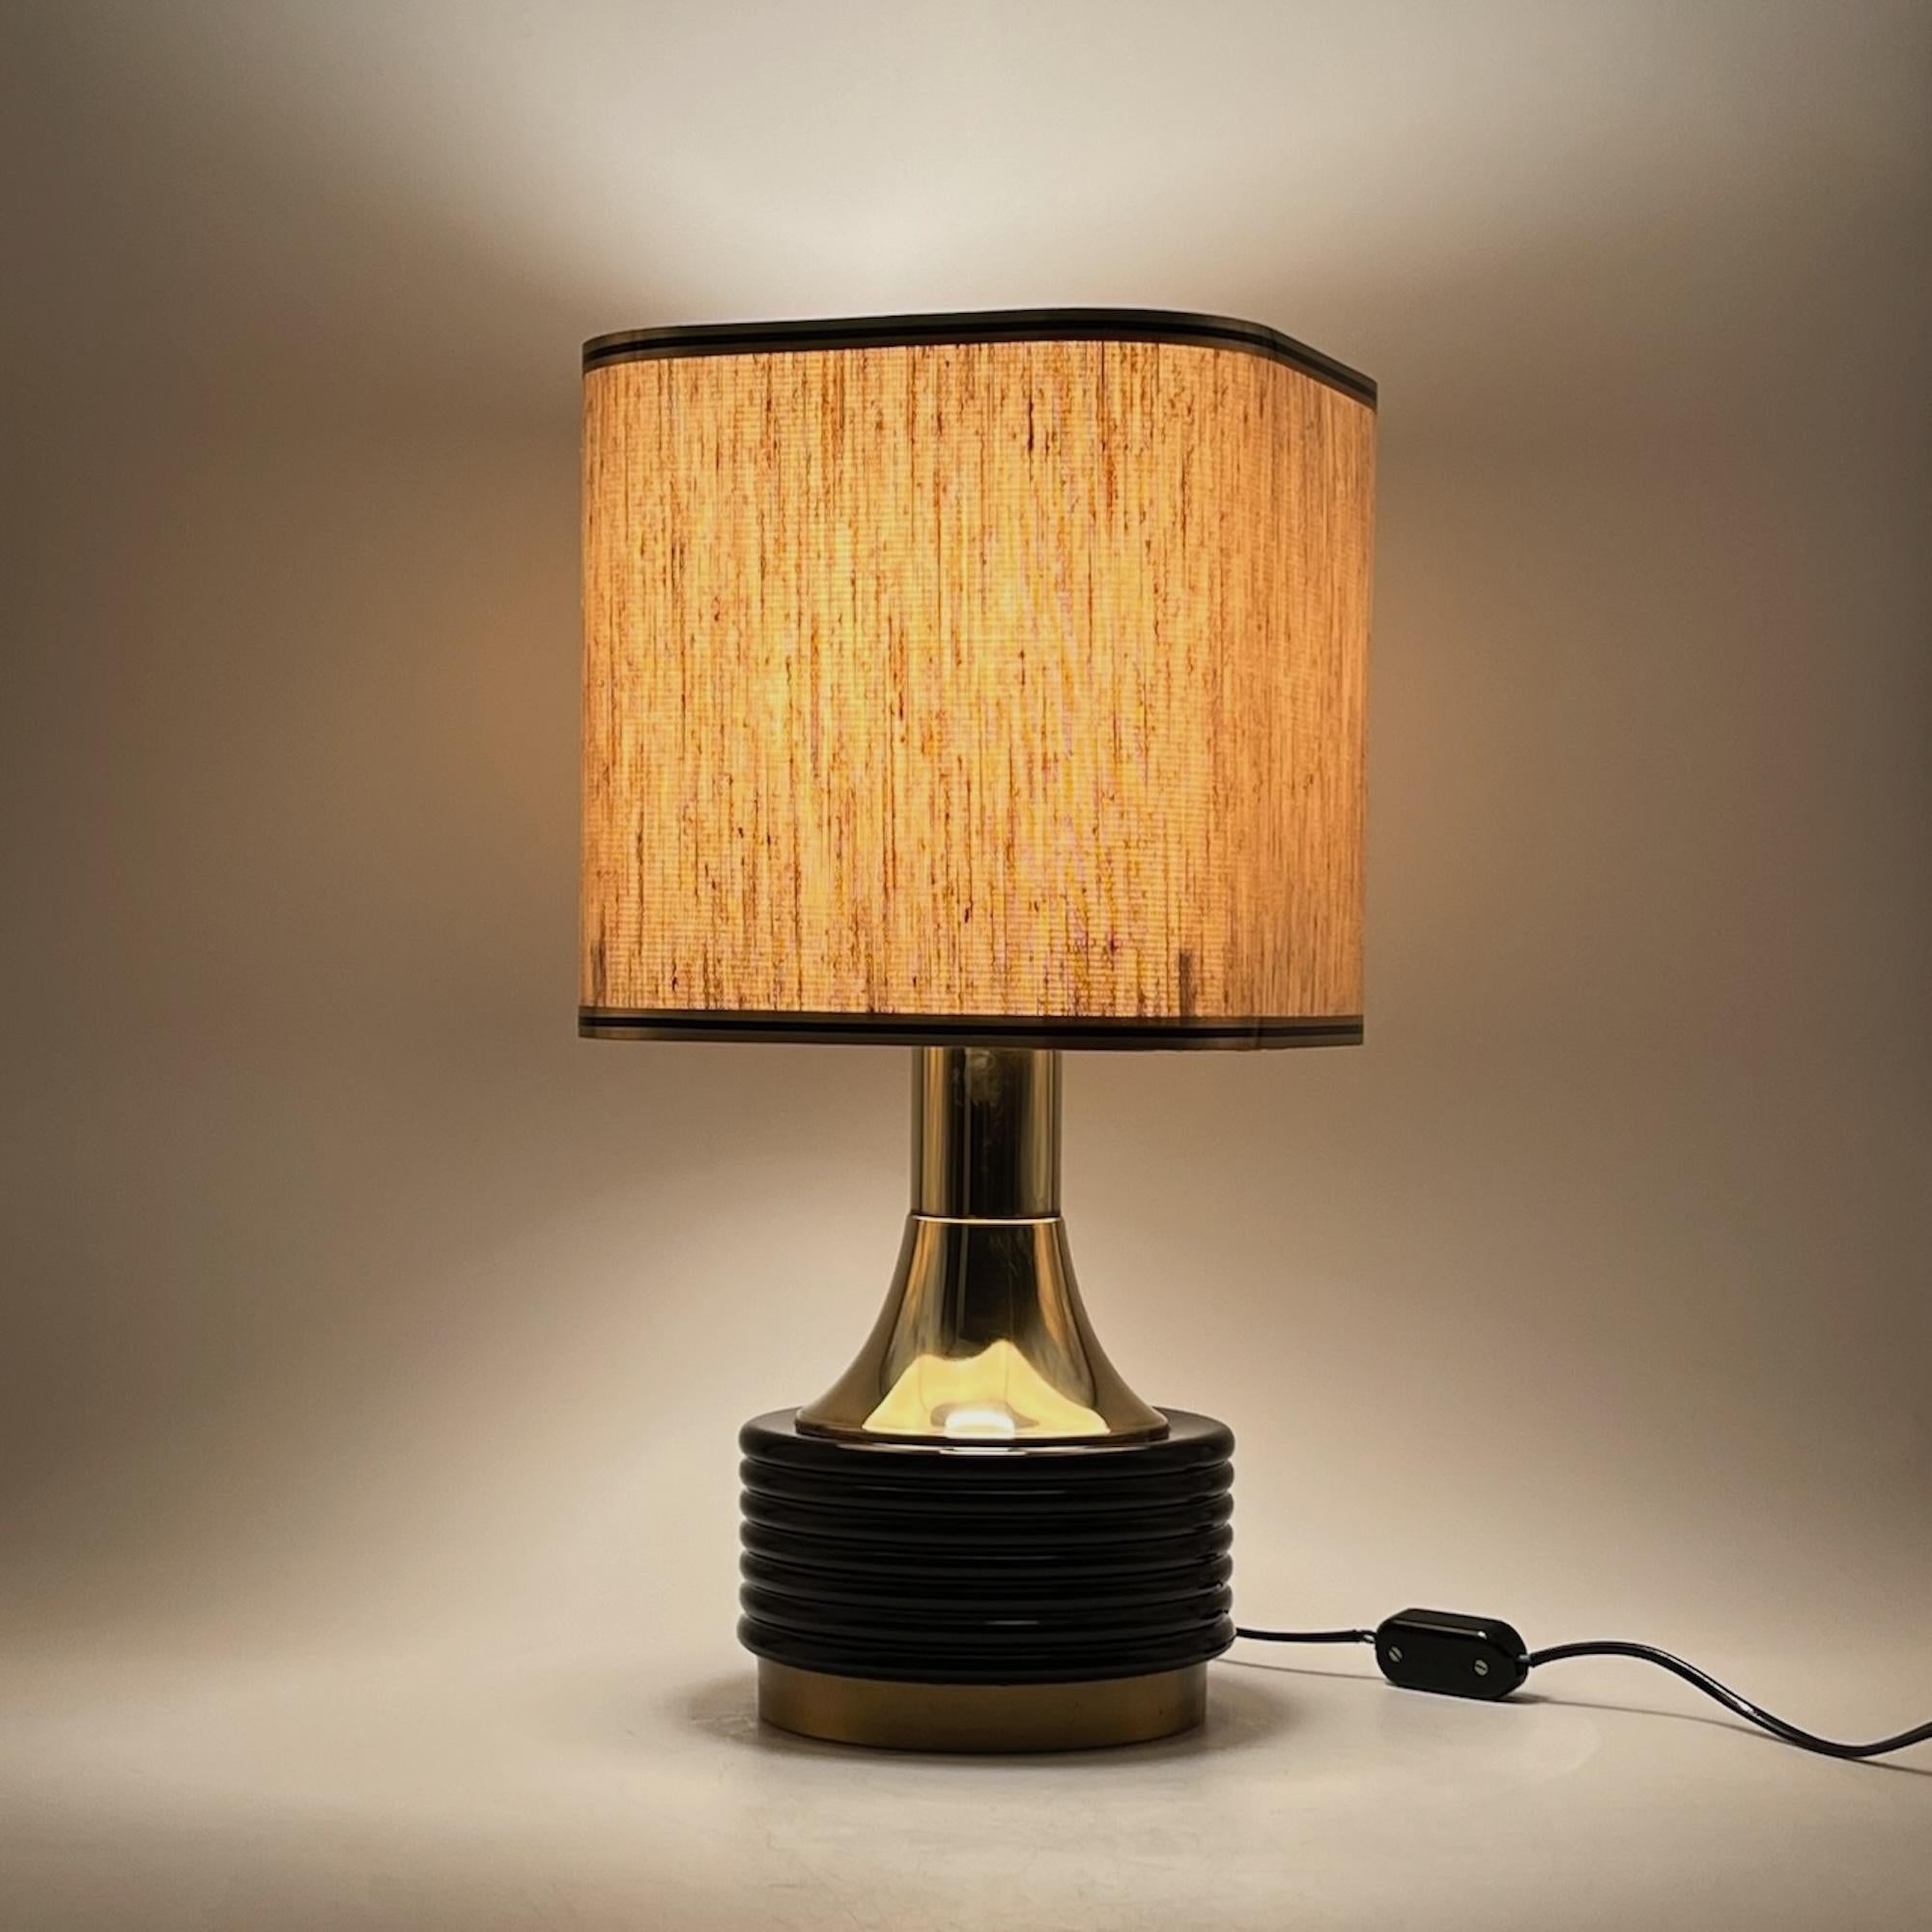 Immerse yourself in the timeless allure of 60s lamps with this exquisite Italian mid-century table lamp, crafted in the style reminiscent of design maestros Willy Rizzo and Tommaso Barbi. This large vintage lamp, originating from the 1960s, is a